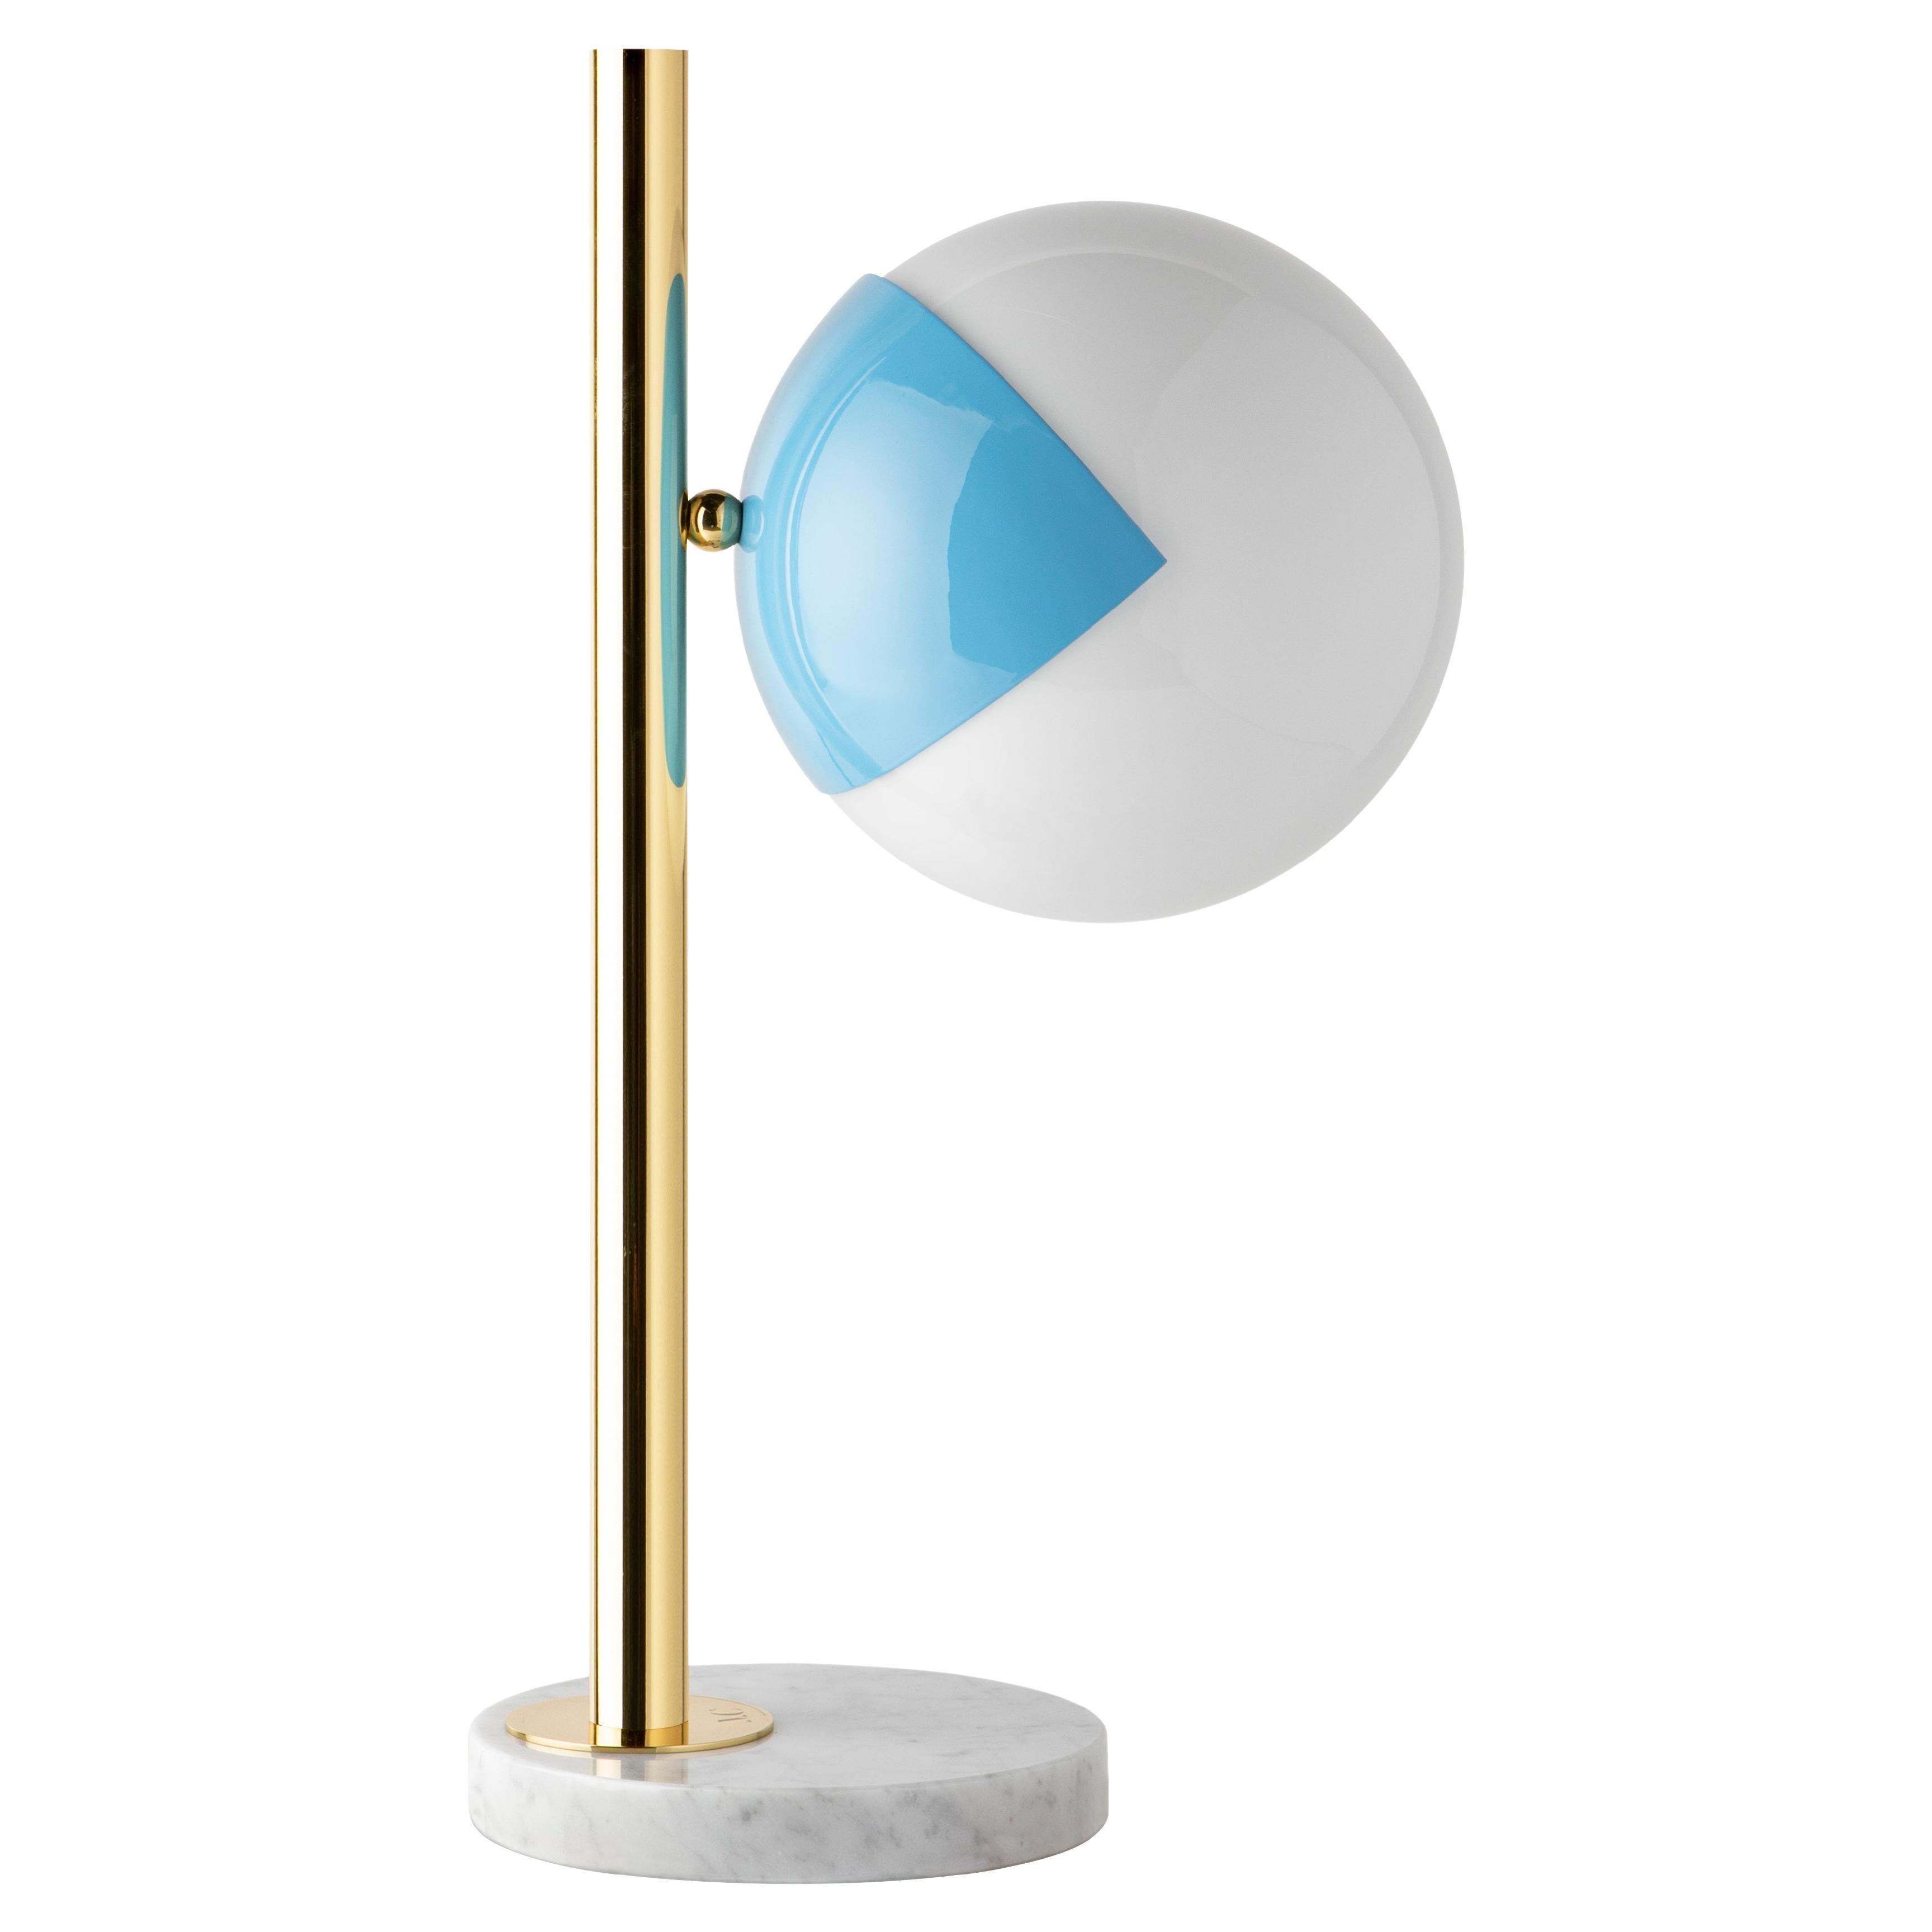 Dimmable table lamp pop-up black by Magic Circus Editions
Dimensions: Ø 22 x 30 x 53 cm 
Materials: Carrara marble base, smooth brass tube, glossy mouth blown glass

All our lamps can be wired according to each country. If sold to the USA it